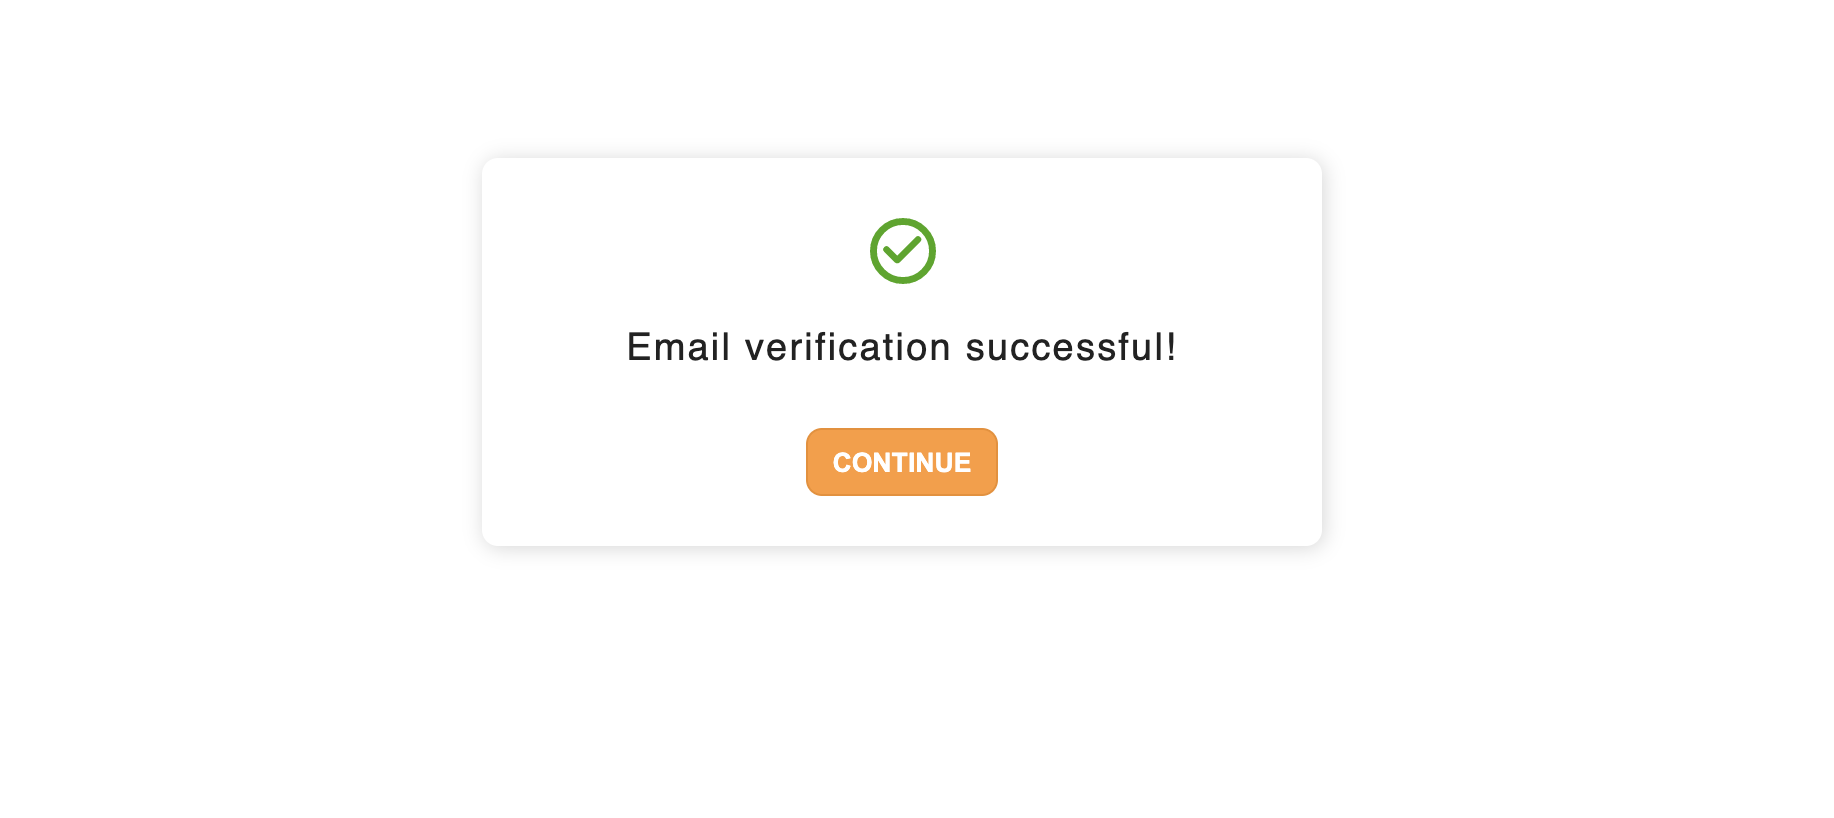 Email verification UI once the link in email is clicked